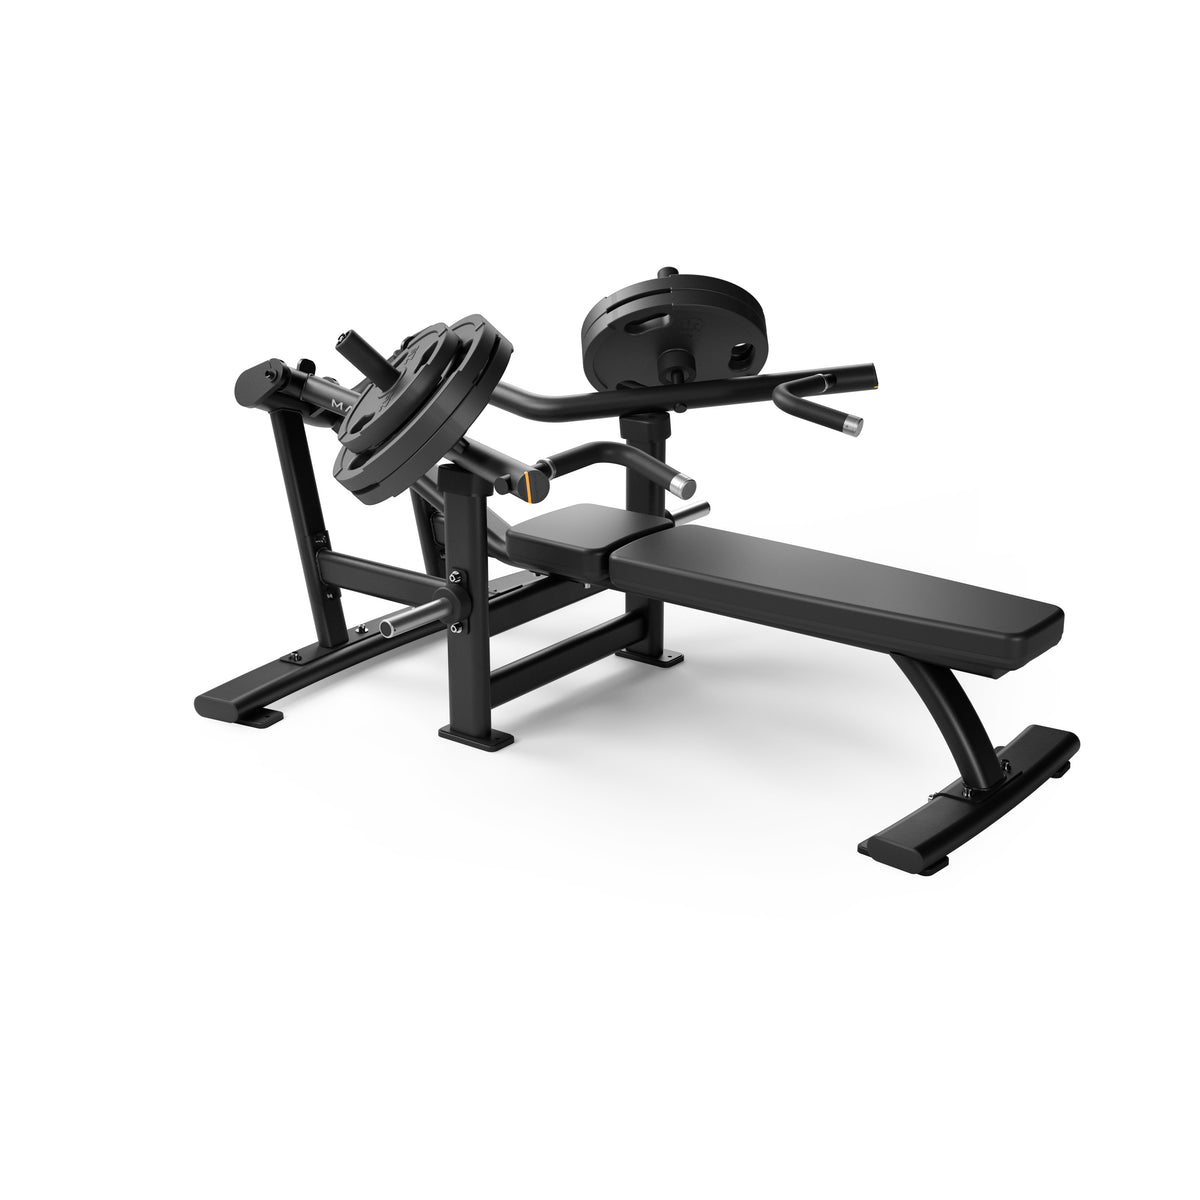 Matrix Fitness Magnum Supine Bench Press full view | Fitness Experience